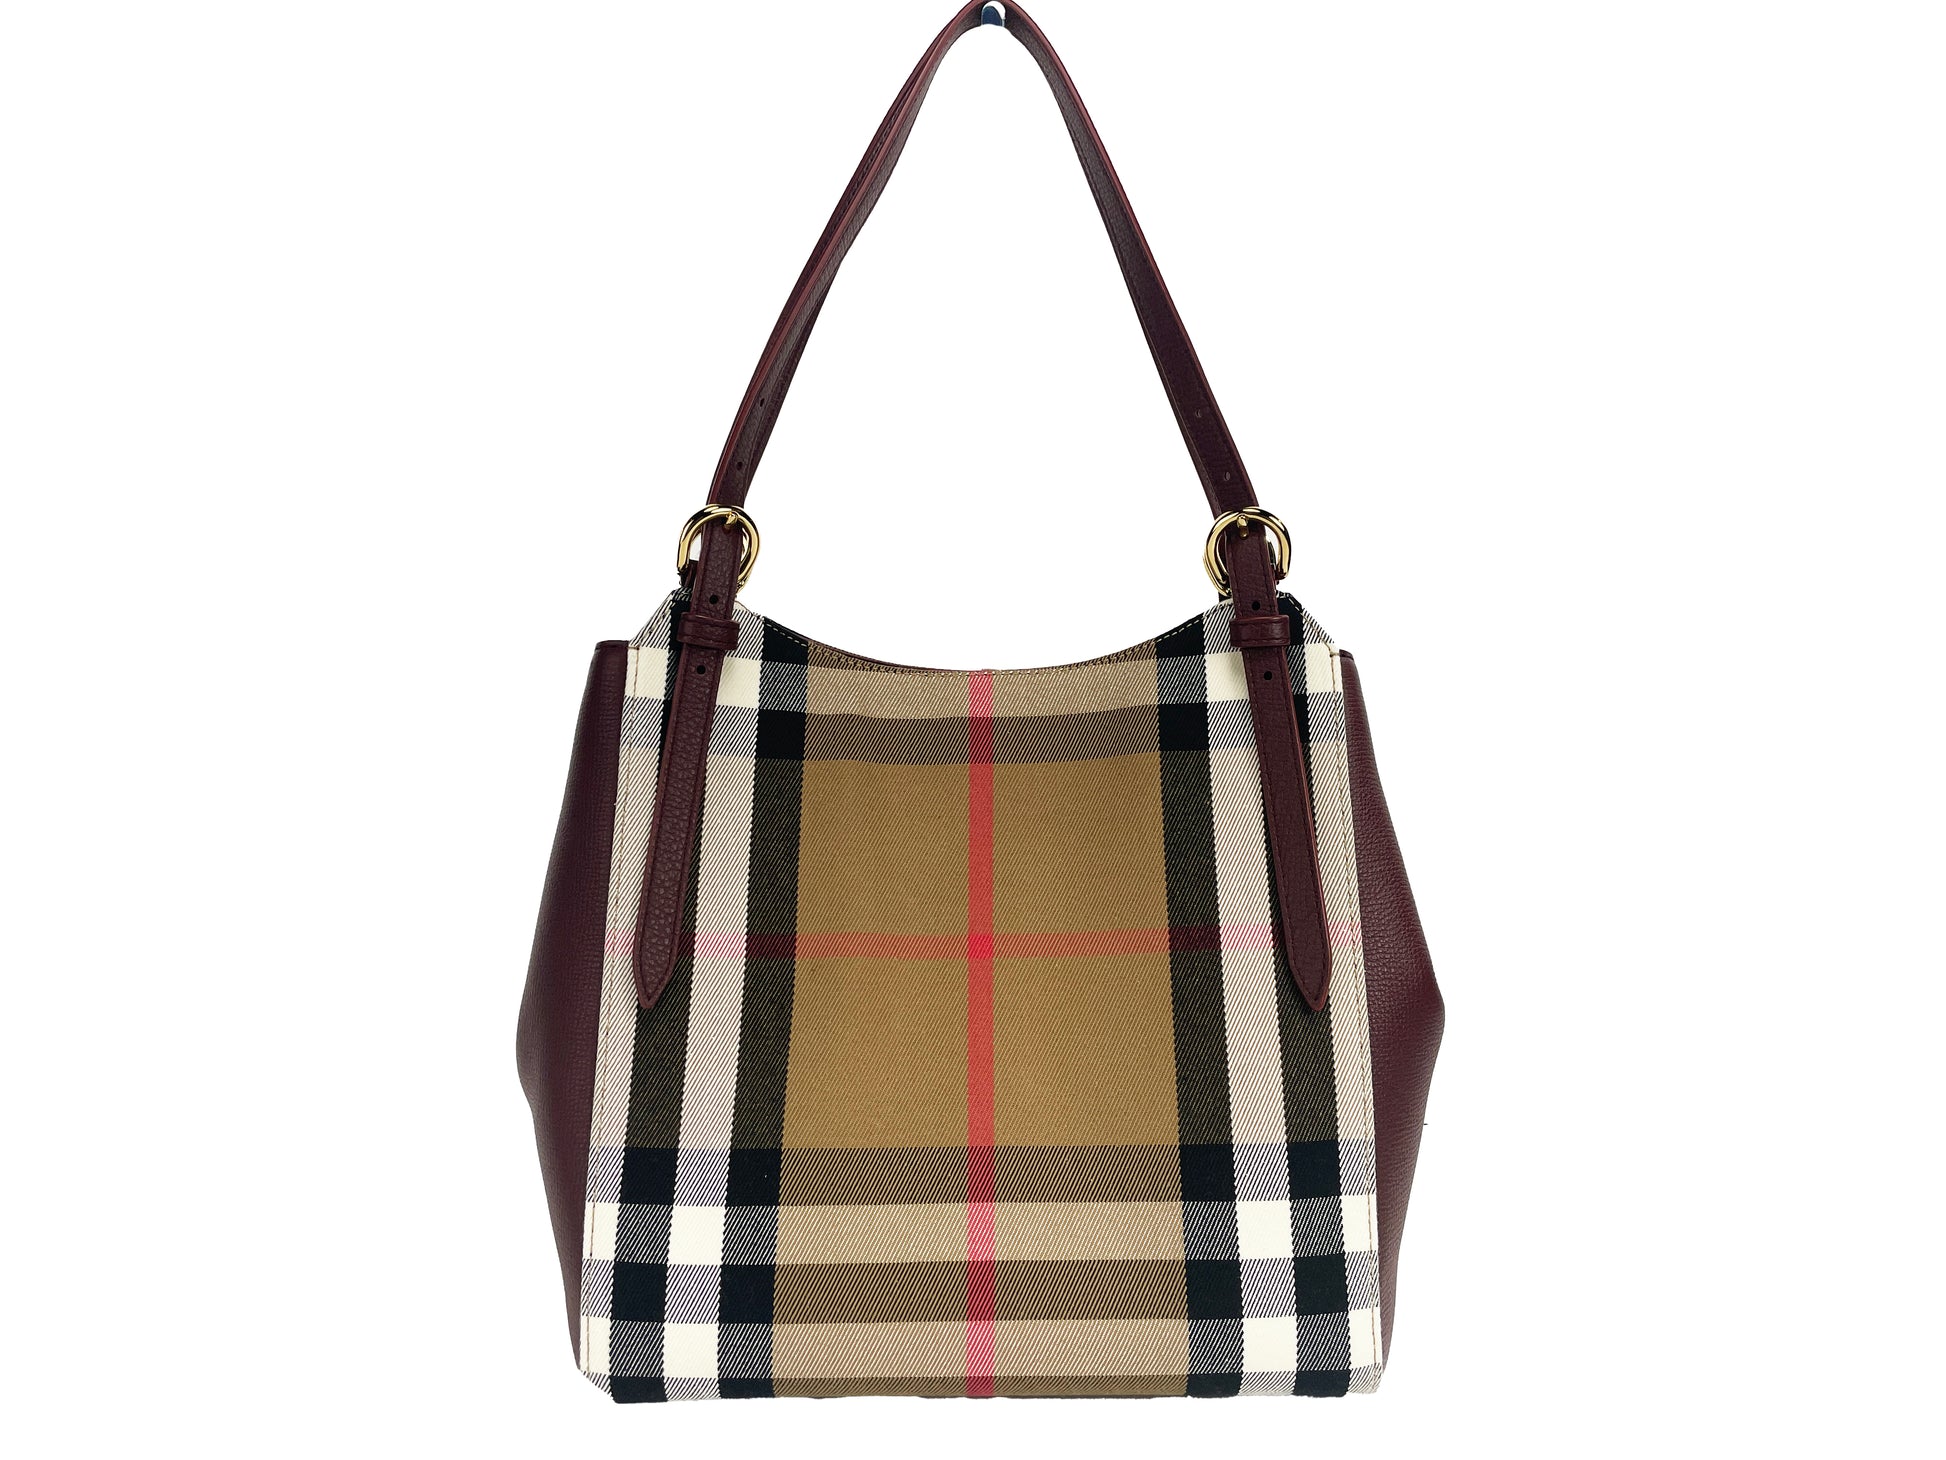 Burberry Small Canterby Mahogany Tote Bag